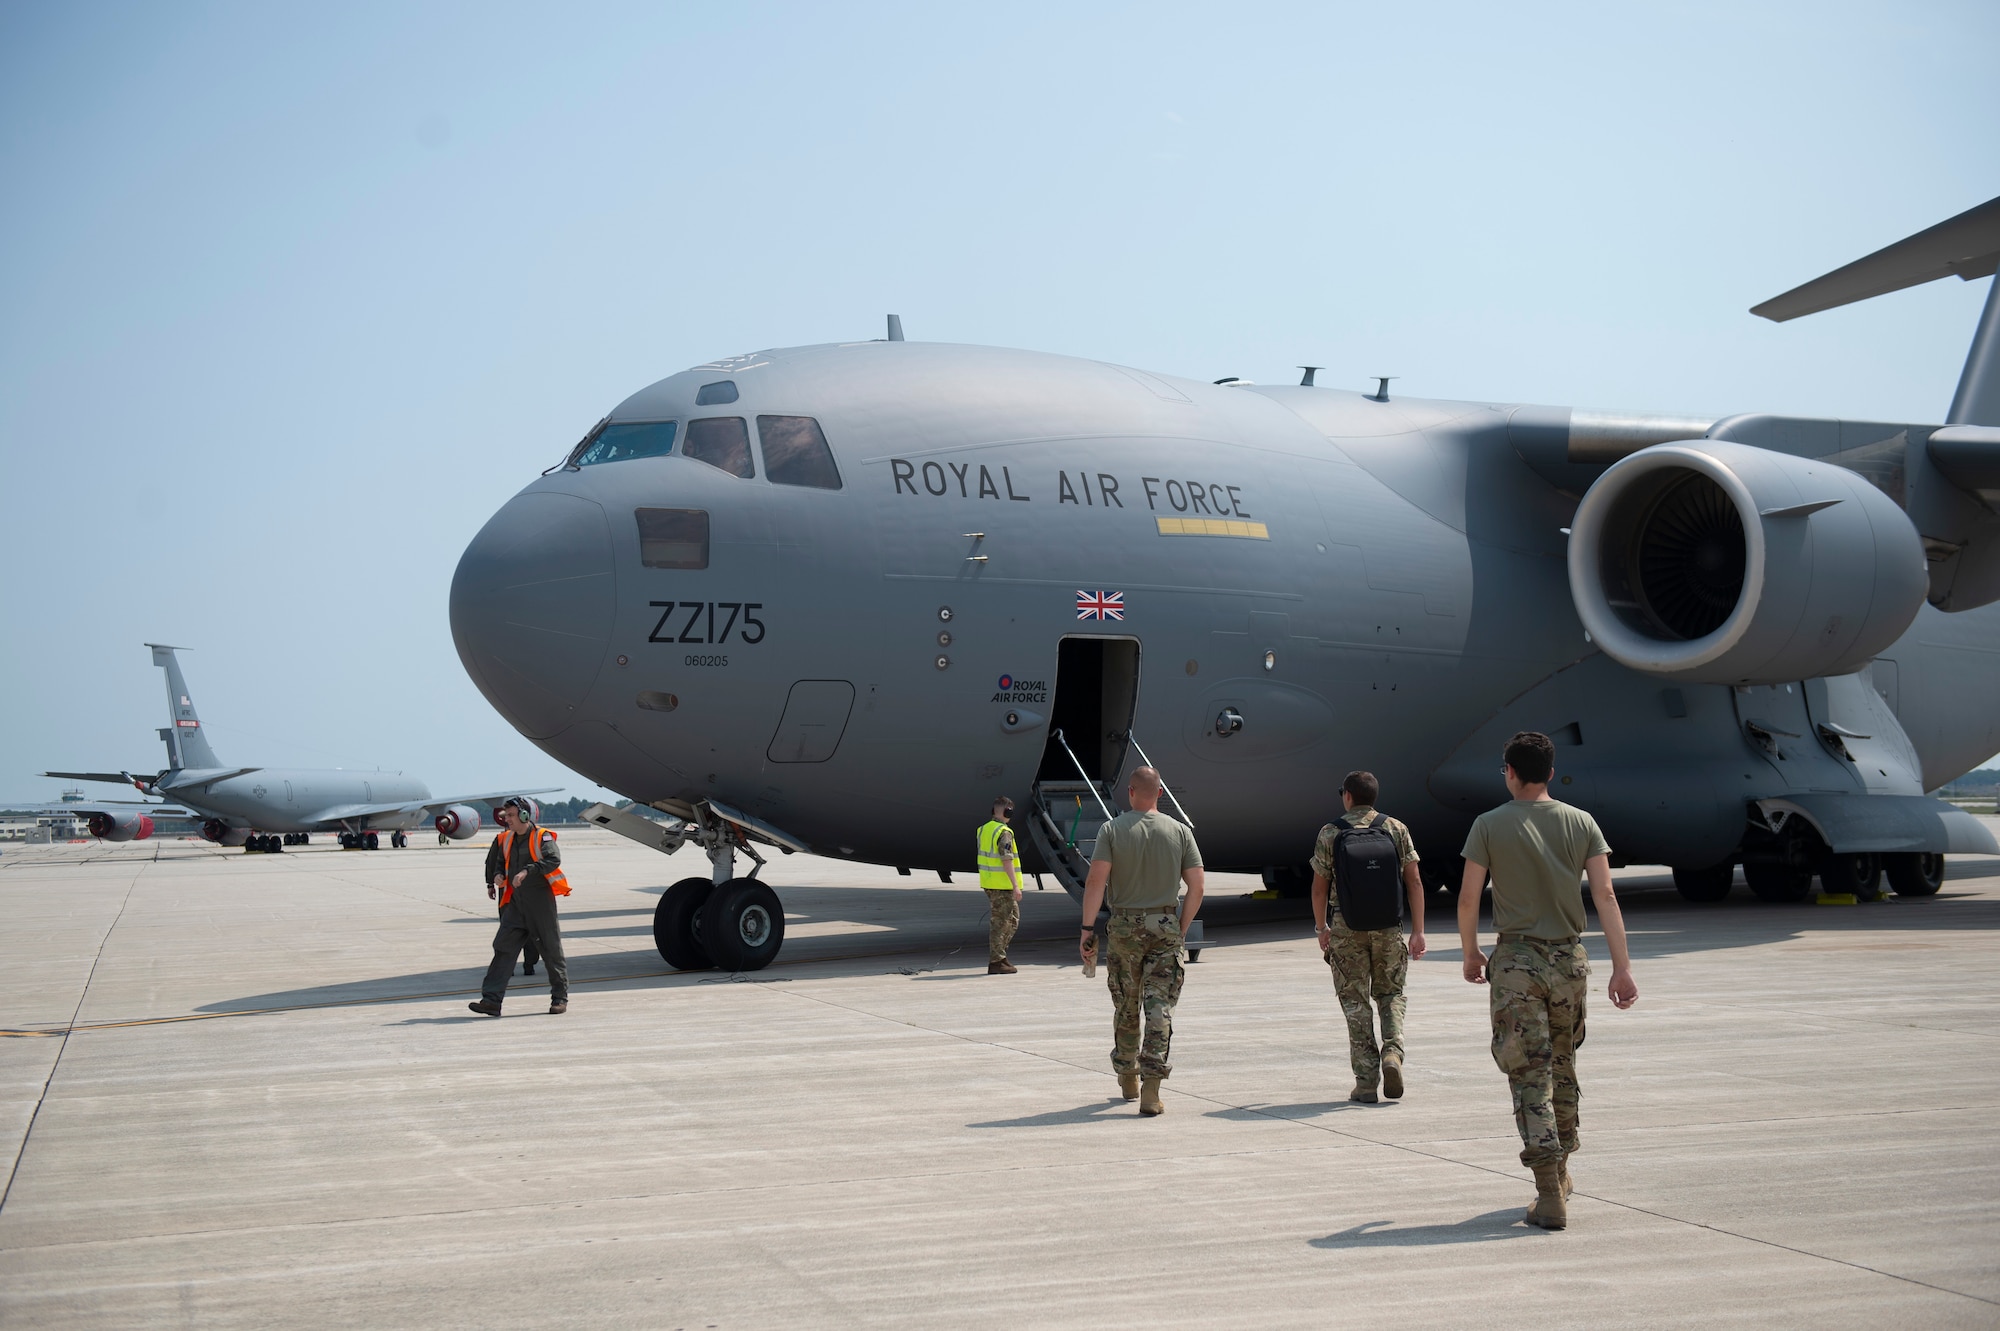 Grissom Airmen walk towards a Royal Air Force C-17 Globemaster III at Grissom Air Reserve Base, Indiana on Aug. 25, 2020. The Royal Air Force stopped at Grissom to train with the 49th Aerial Port Squadron on building cargo pallets. (U.S. Air Force photo/Senior Airman Michael Hunsaker)